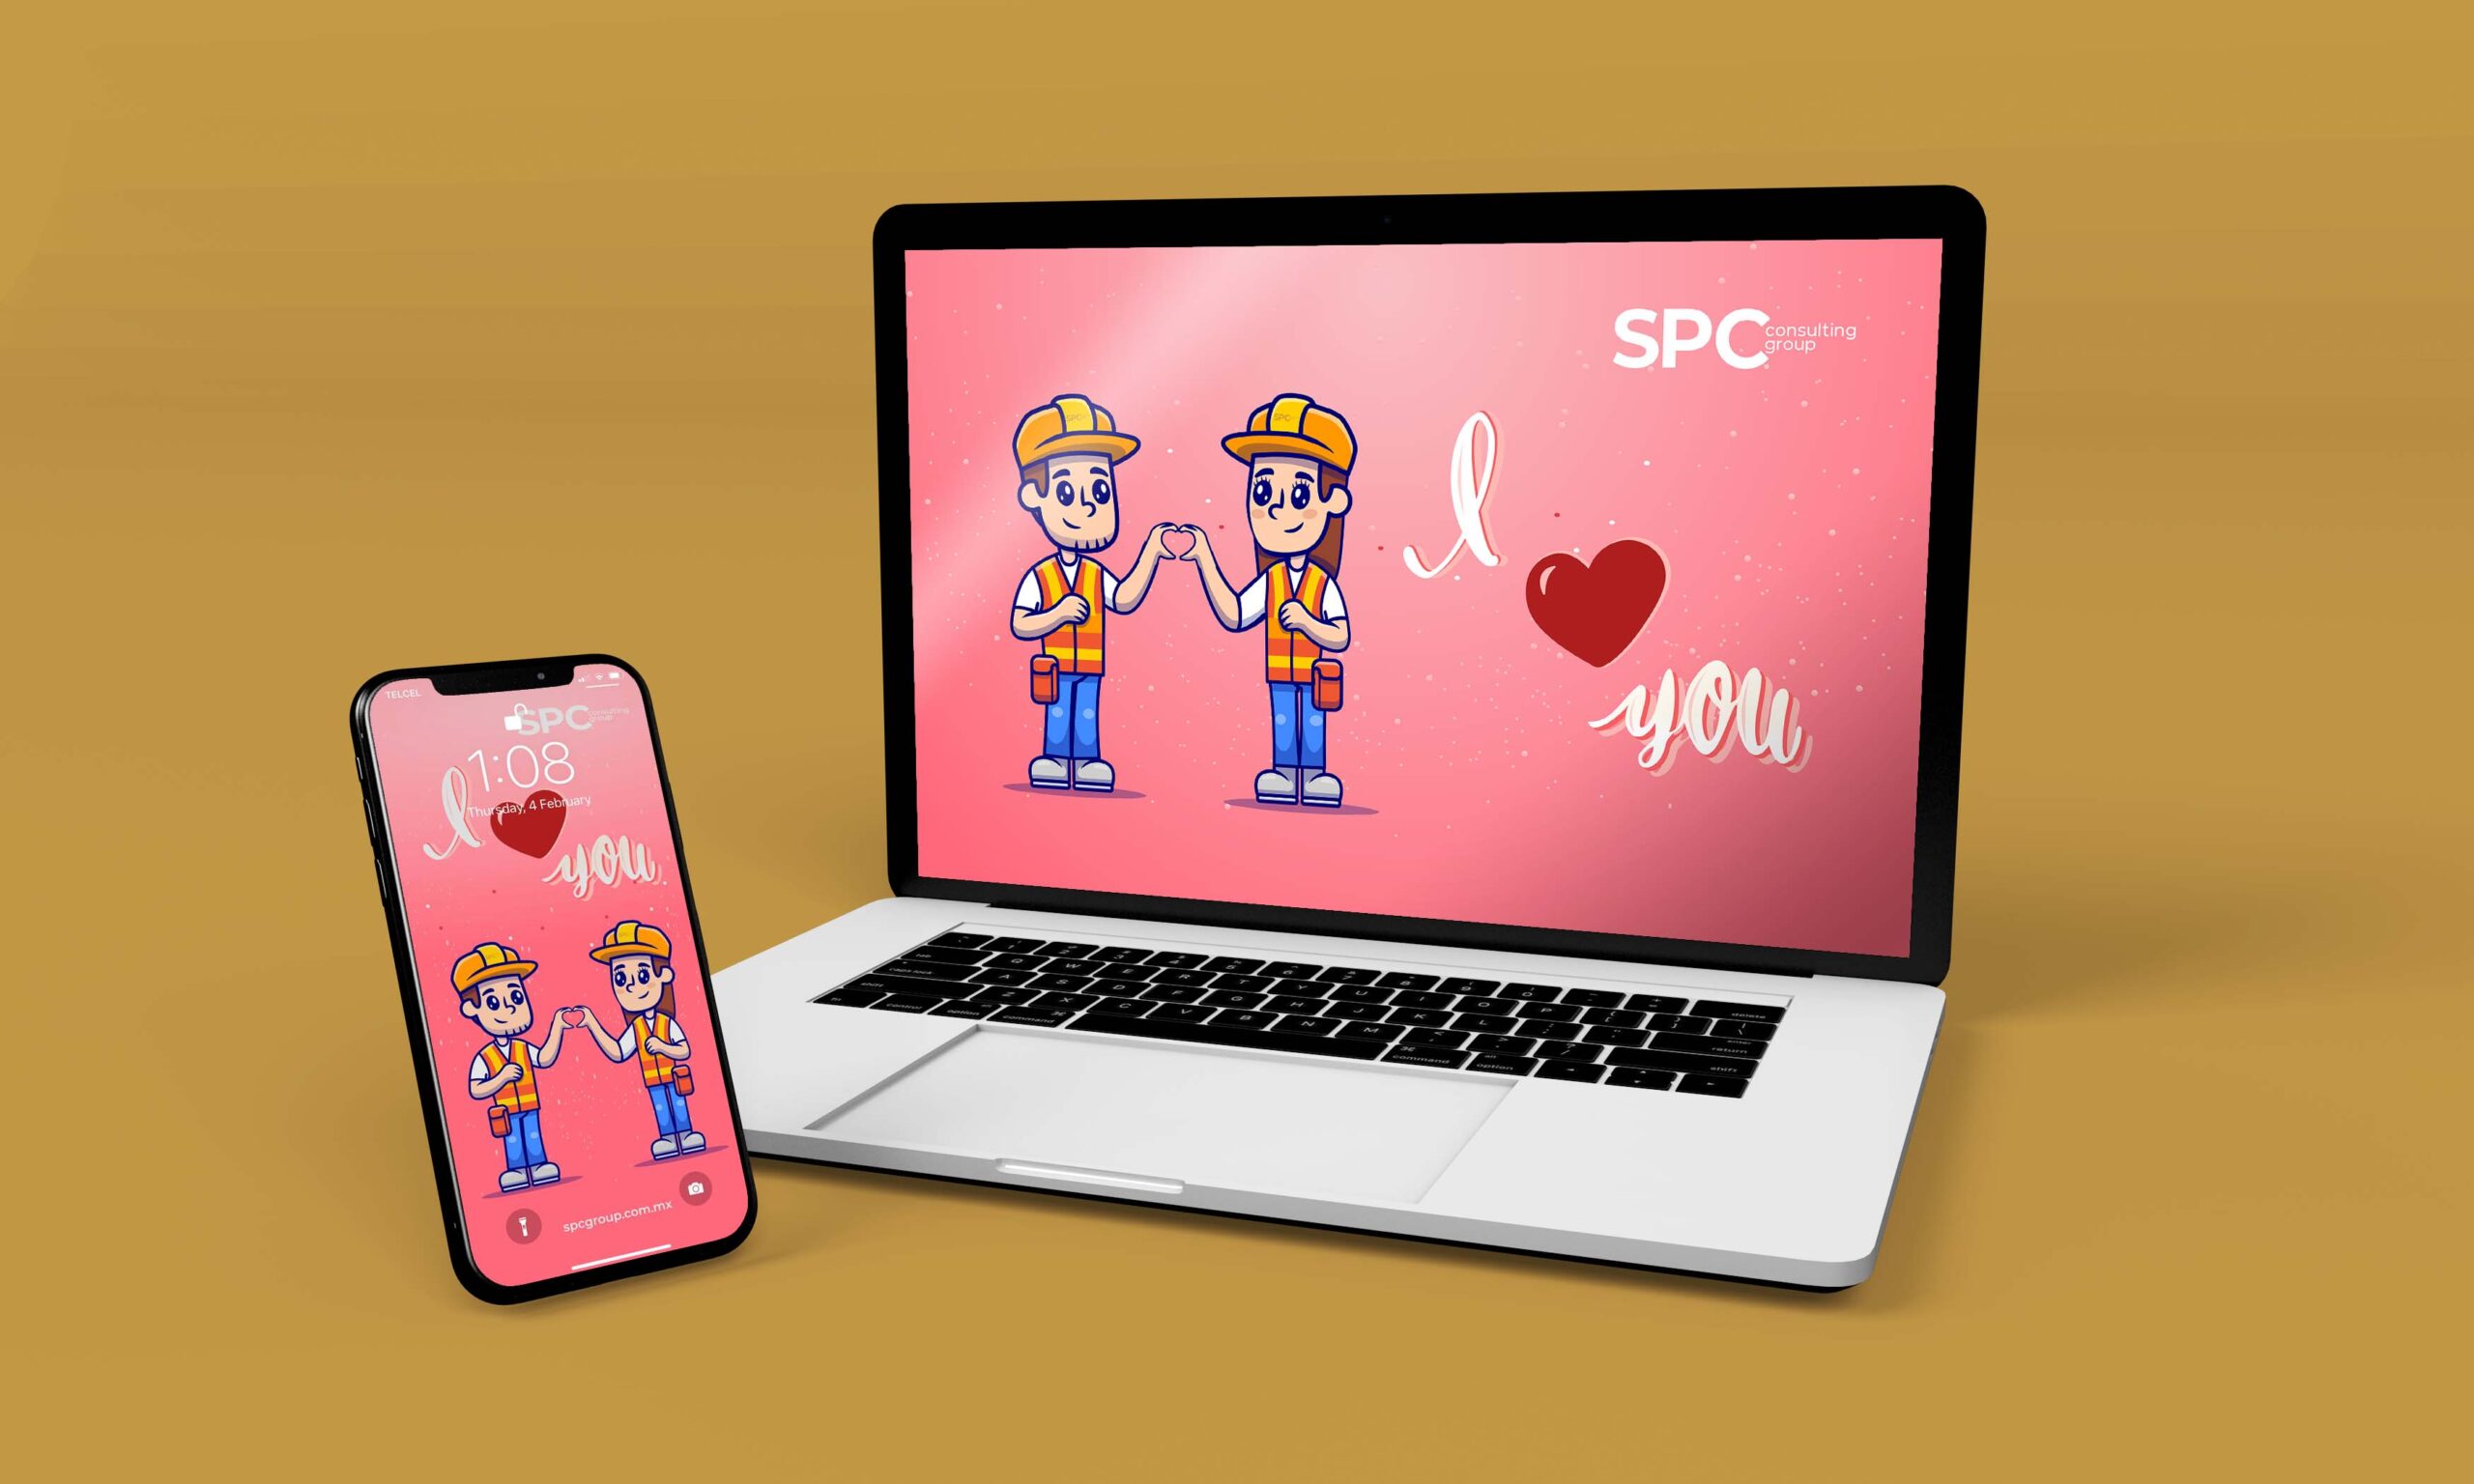 Wallpapers | SPC Consulting Group